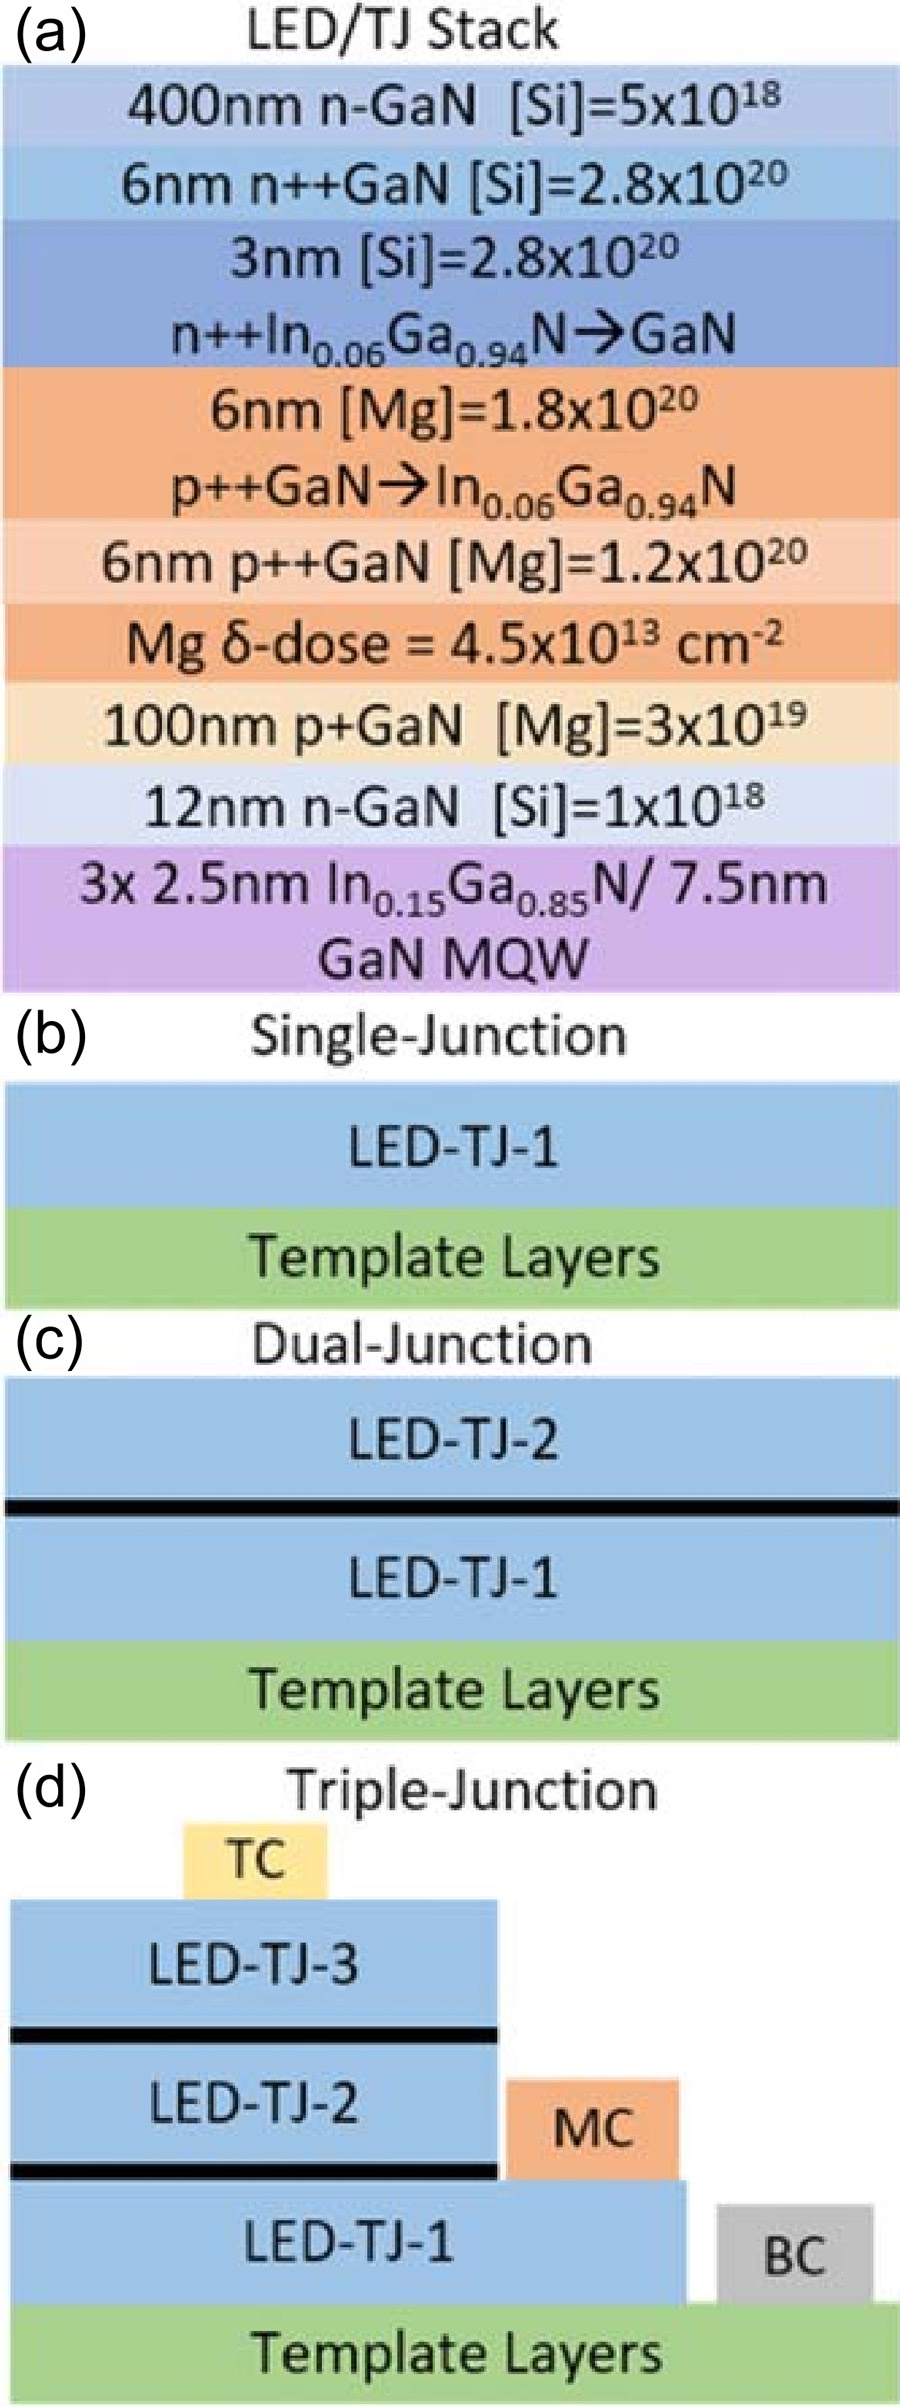 Figure 1: Epitaxial structure of (a) each LED/graded InGaN TJ period, (b) single-junction device, (c) dual-junction device, and (d) full three-junction device with top (TC), middle (MC) and bottom (BC) contacts.